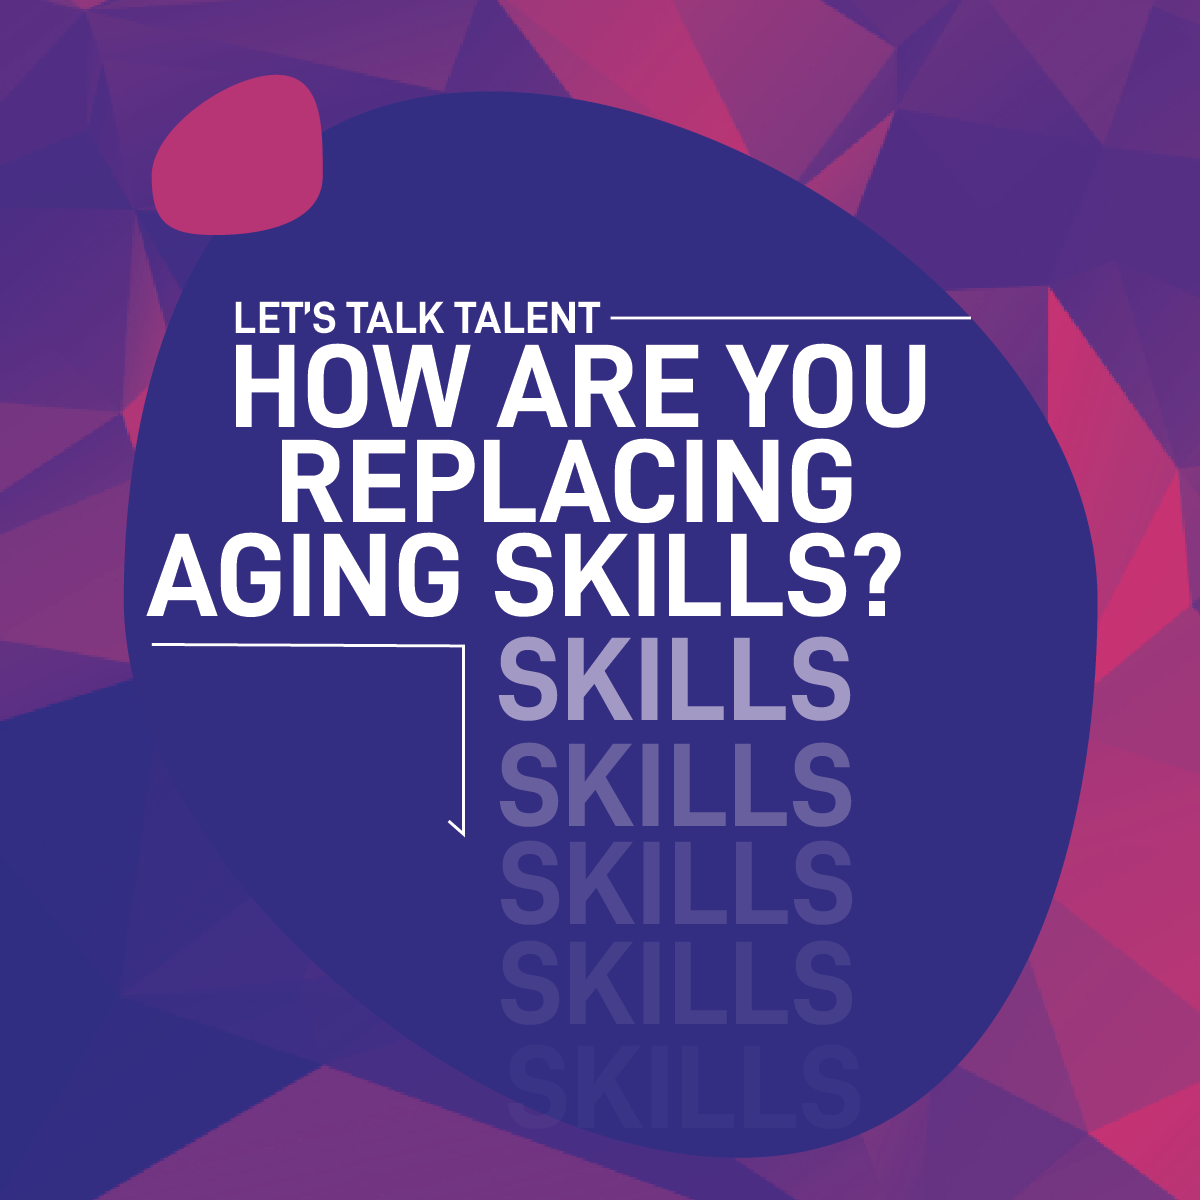 CSI helps replace aging IT skills. 
